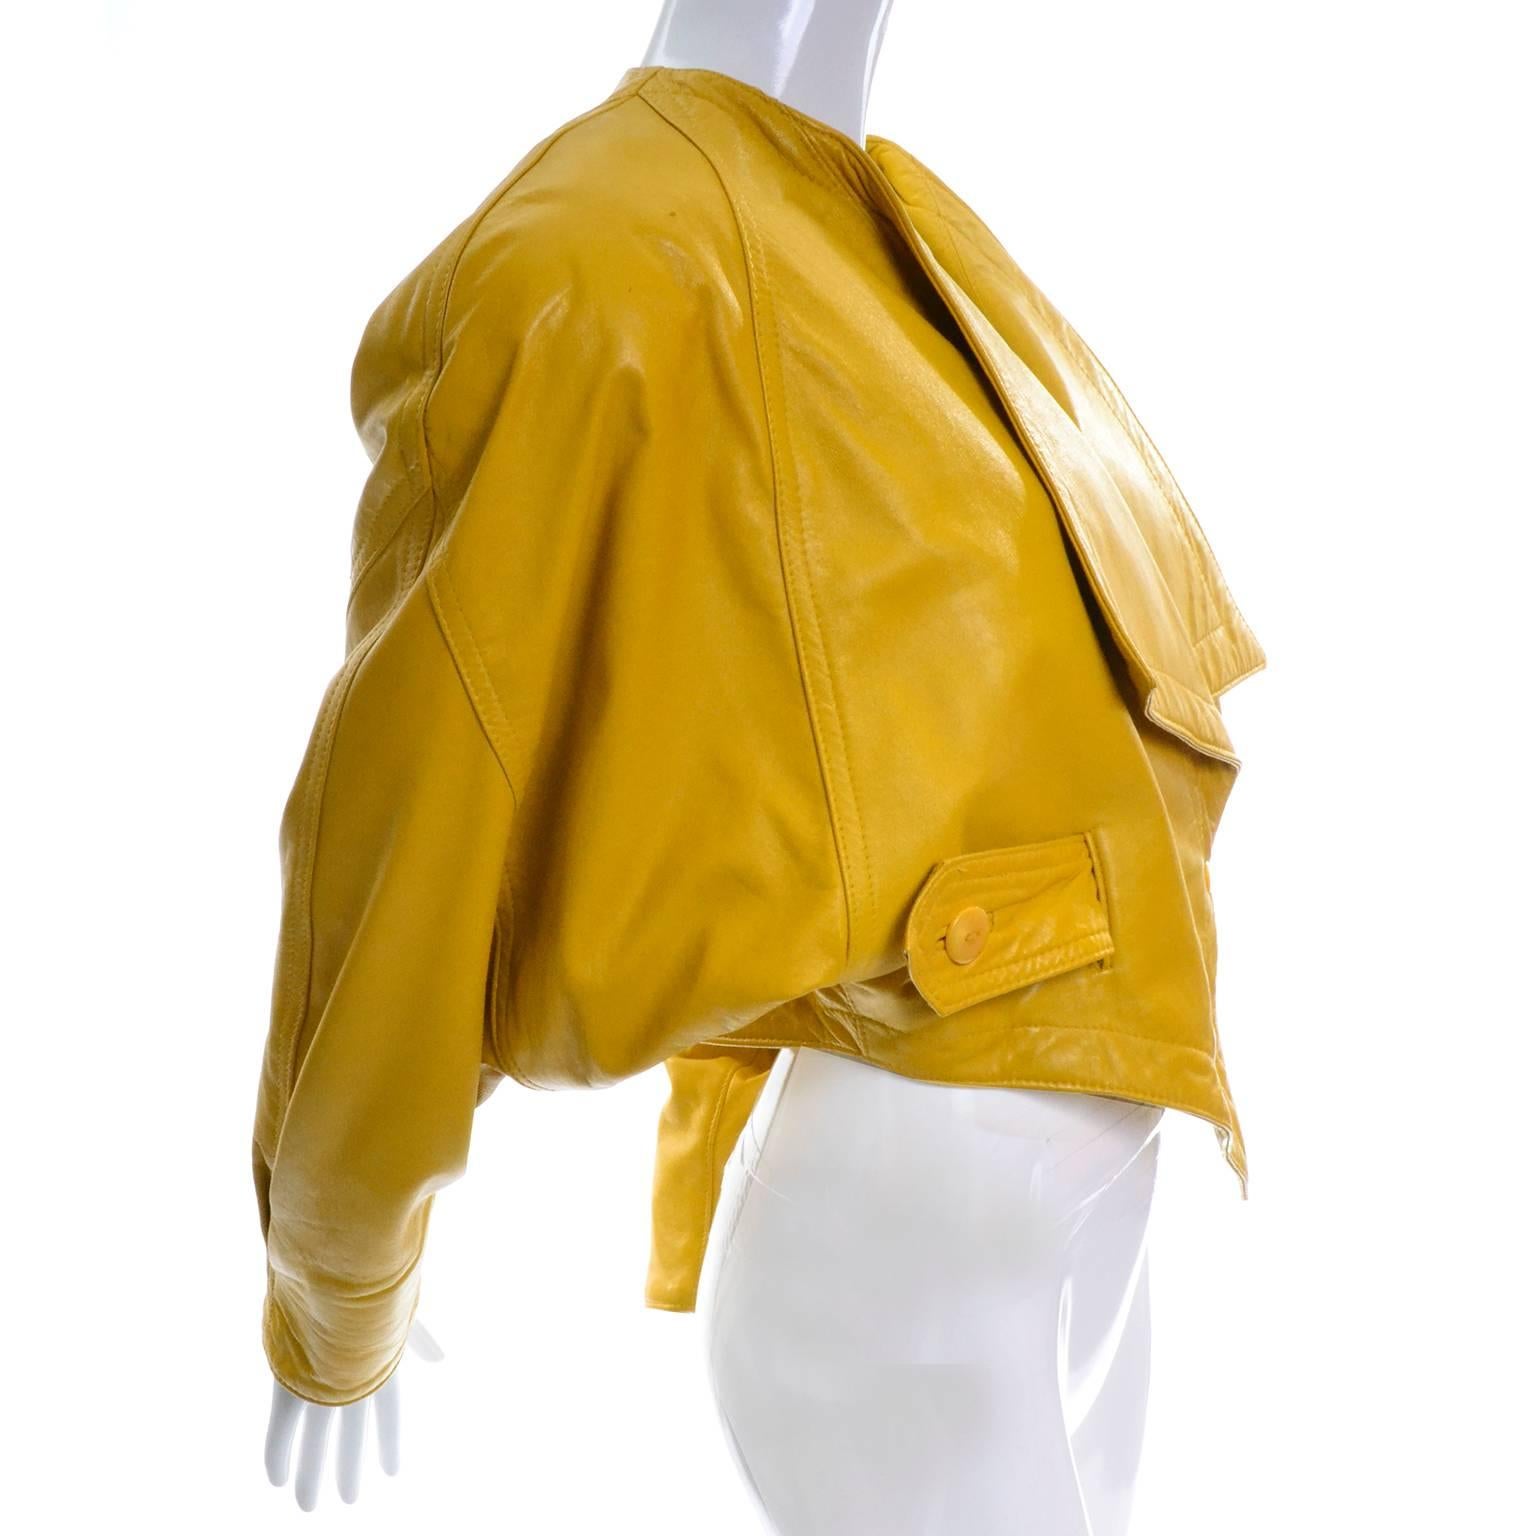 This is a show stopping mustard yellow vintage jacket designed by Rocco D'Amelio for Giovinezza Moda in the 1980's.  The jacket has dolman sleeves, shoulder pads and an asymmetrical front closure with a snap and a button that closes with a small